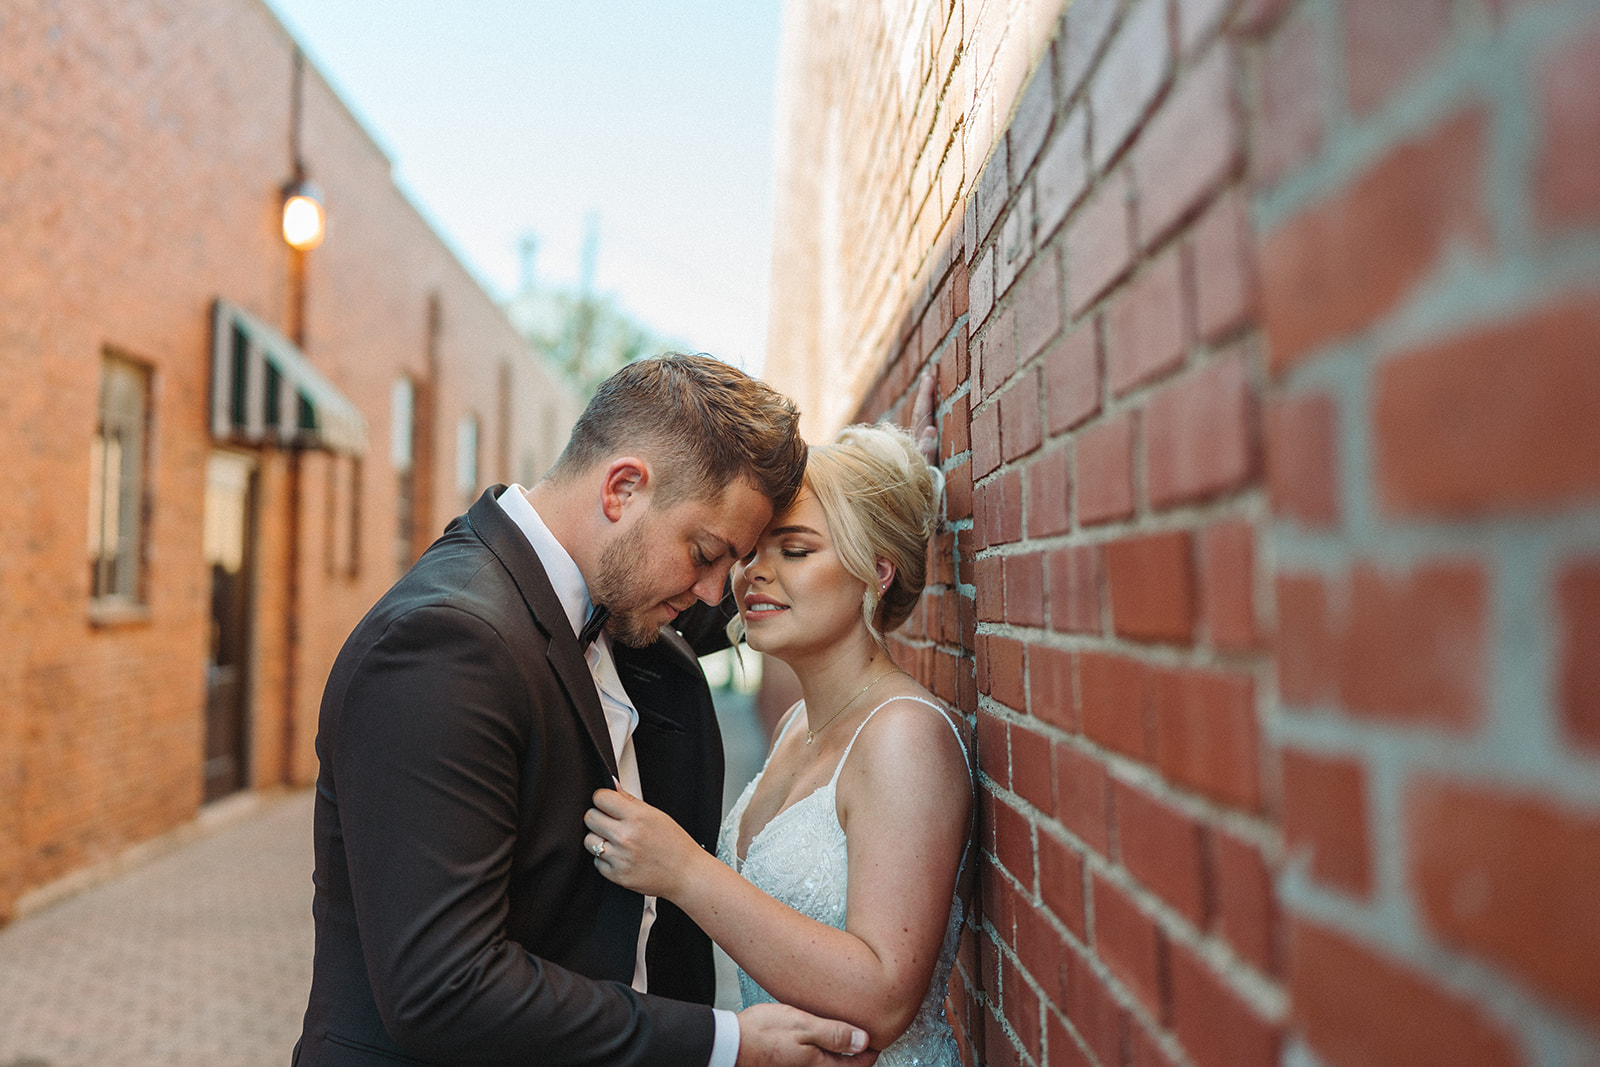 Vintage Wedding At The Lancaster Theater In Grapevine, Texas